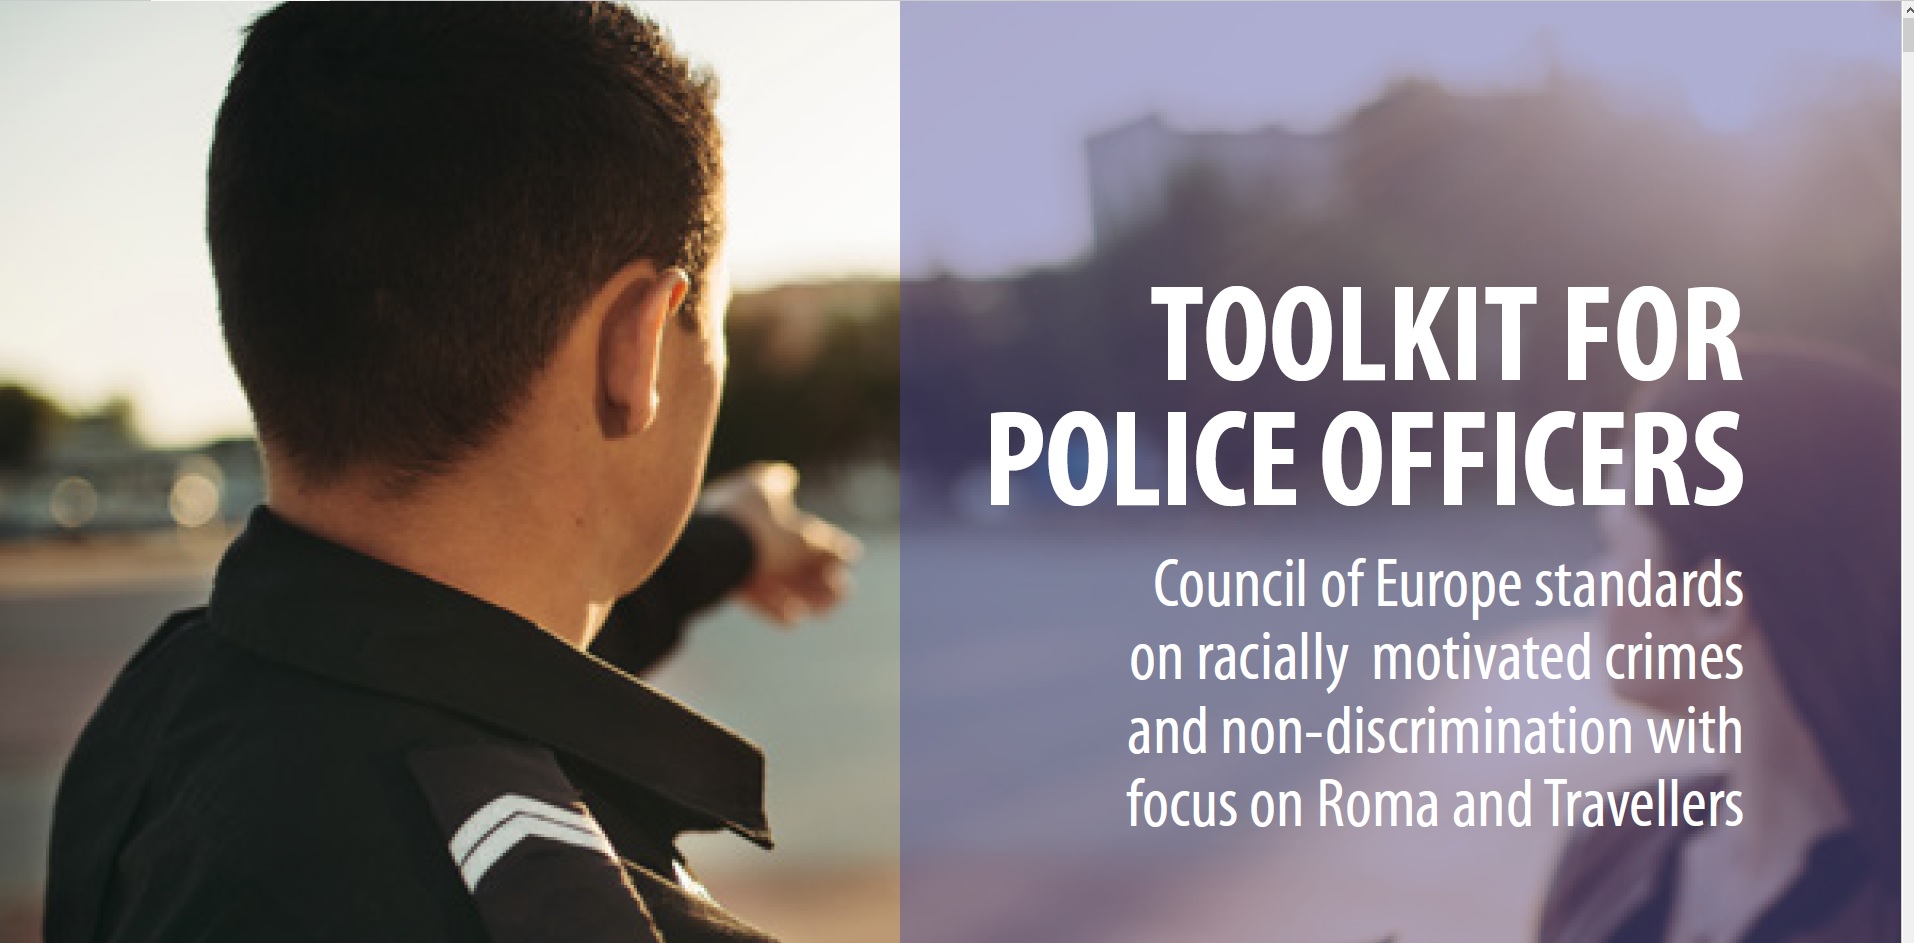 Toolkit for Police Officers: Council of Europe standards on racially motivated crimes and non-discrimination